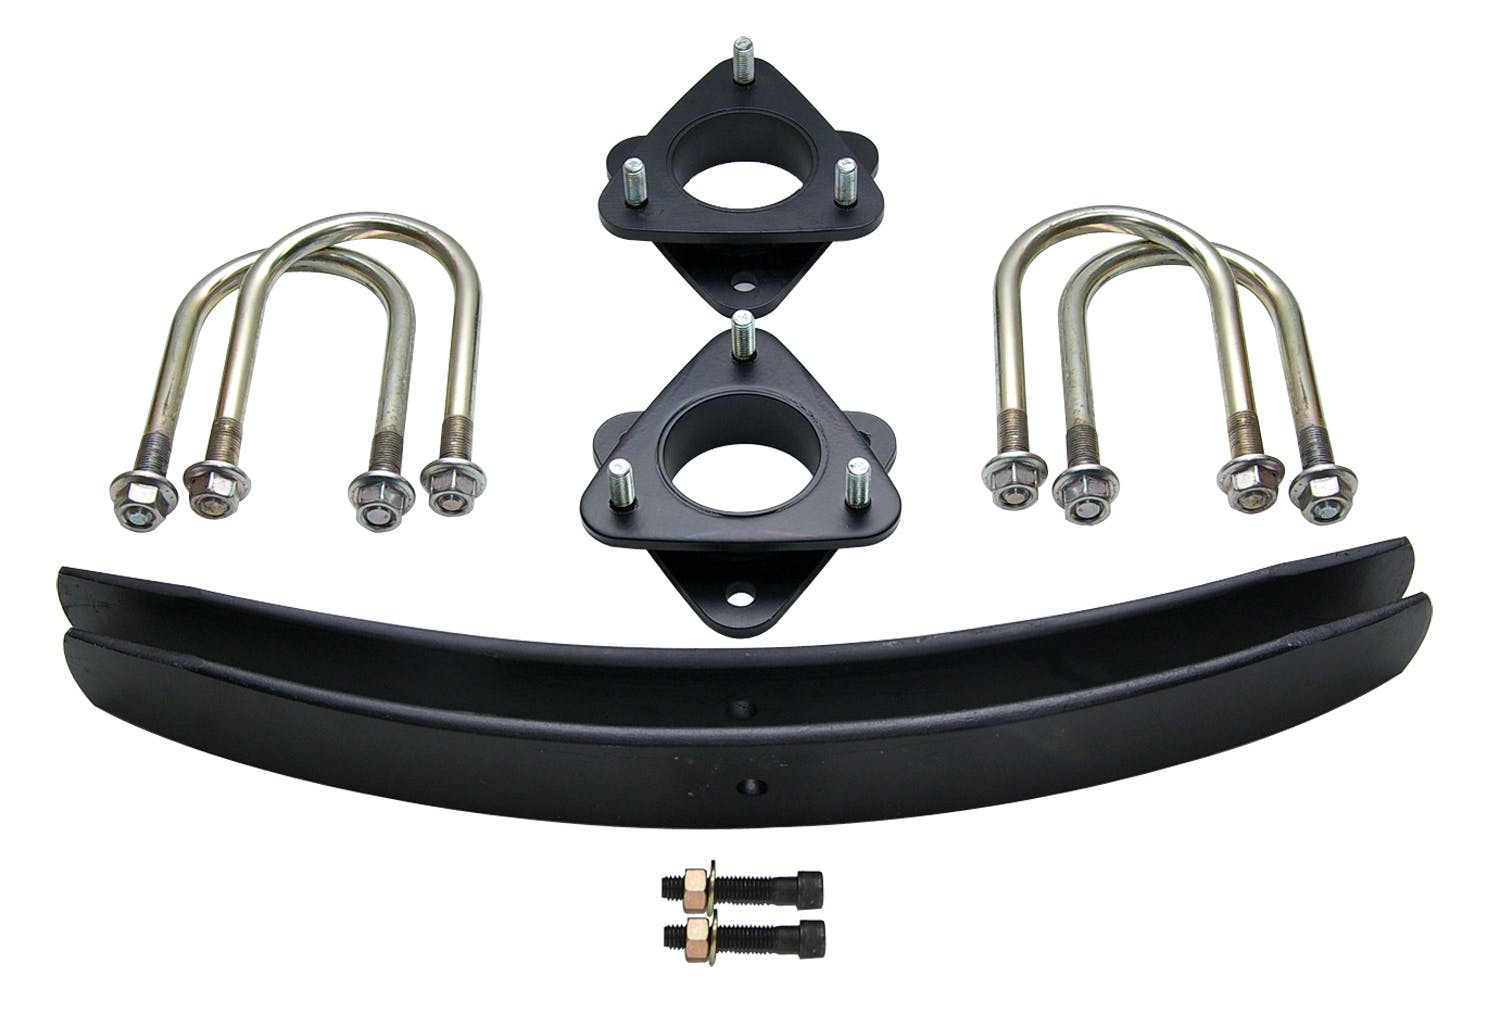 ReadyLIFT 69-5510 2.75" SST Lift Kit with 1.75" Add-a-Leaf without Shocks